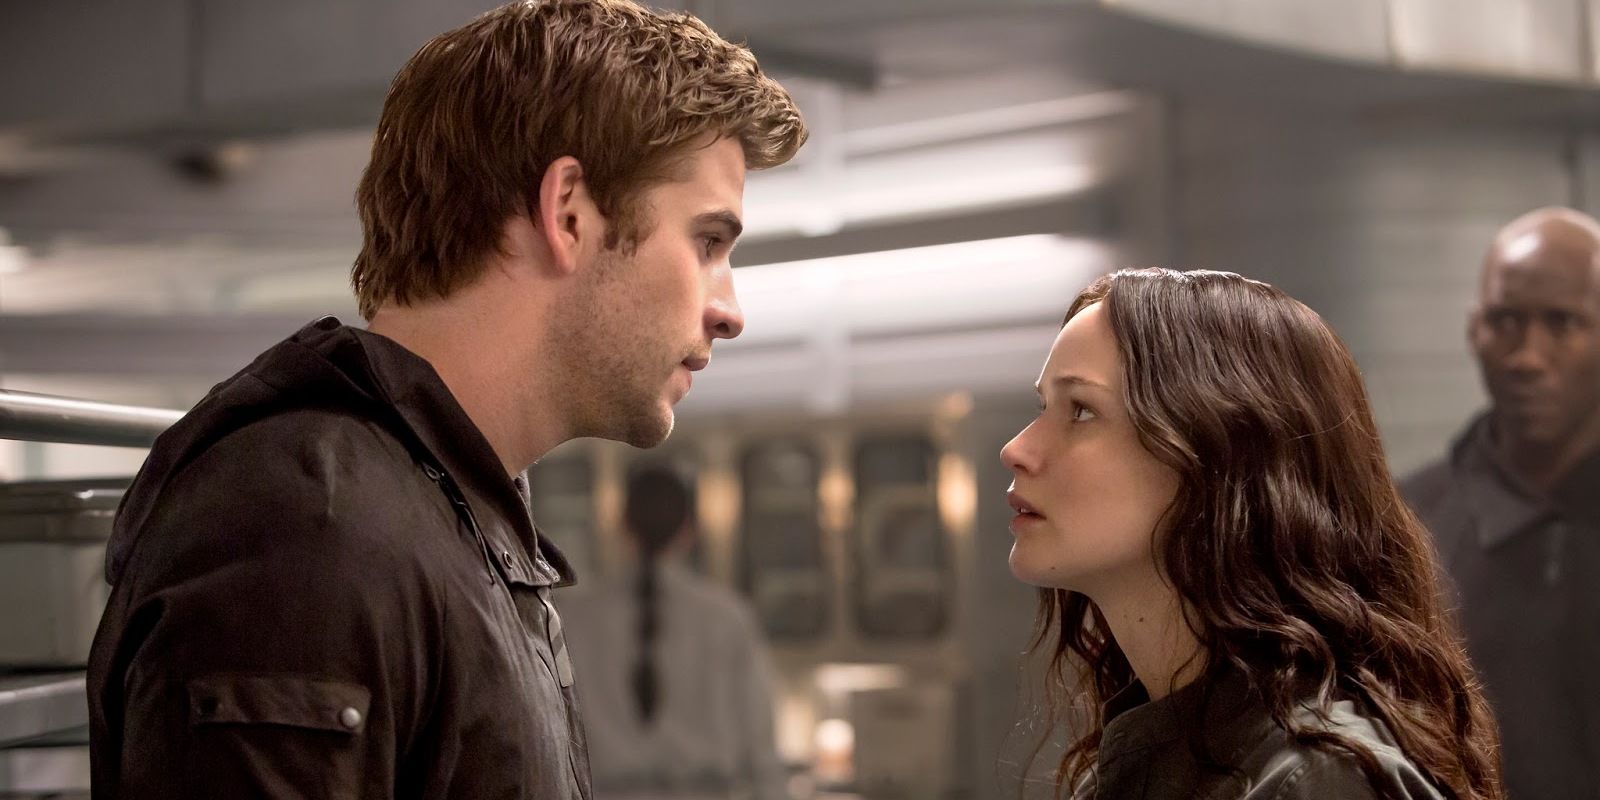 Katniss and Gale arguing in The Hunger Games: Mockingjay.